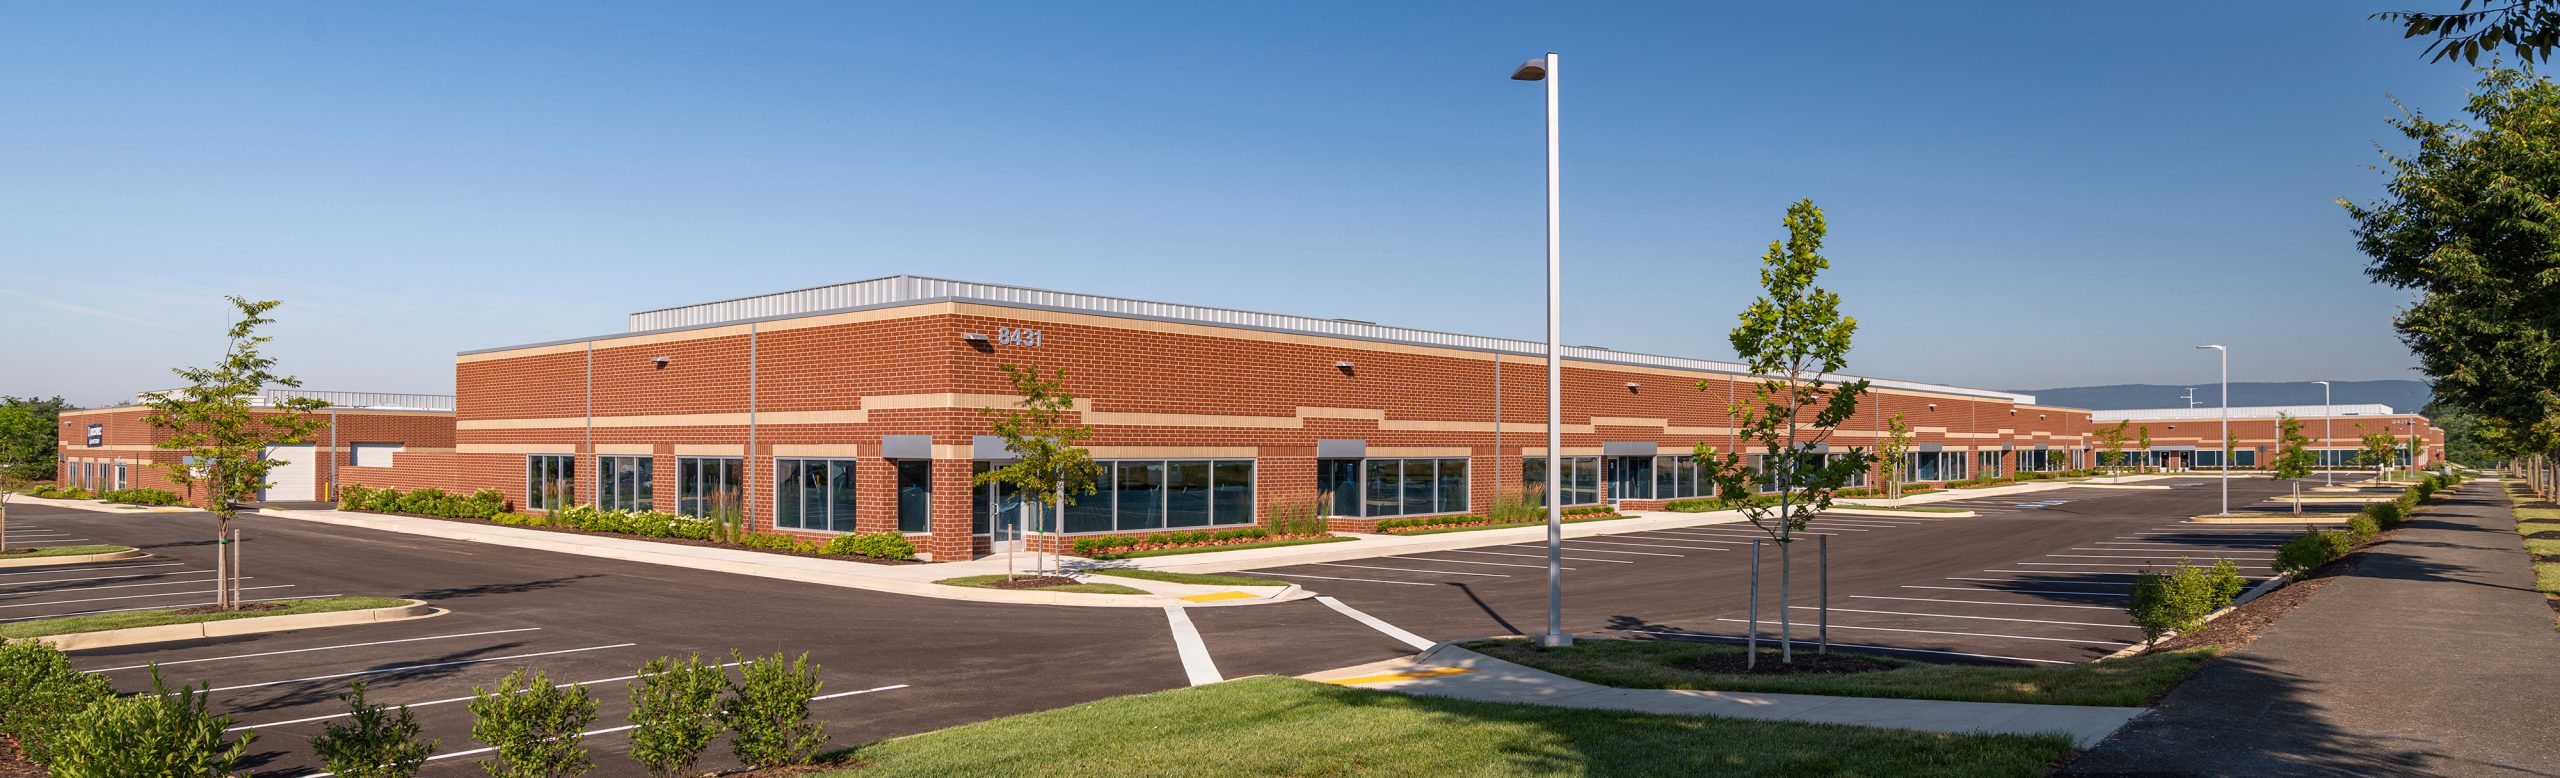 Riverside Tech Westview Business Park in Frederick, MD